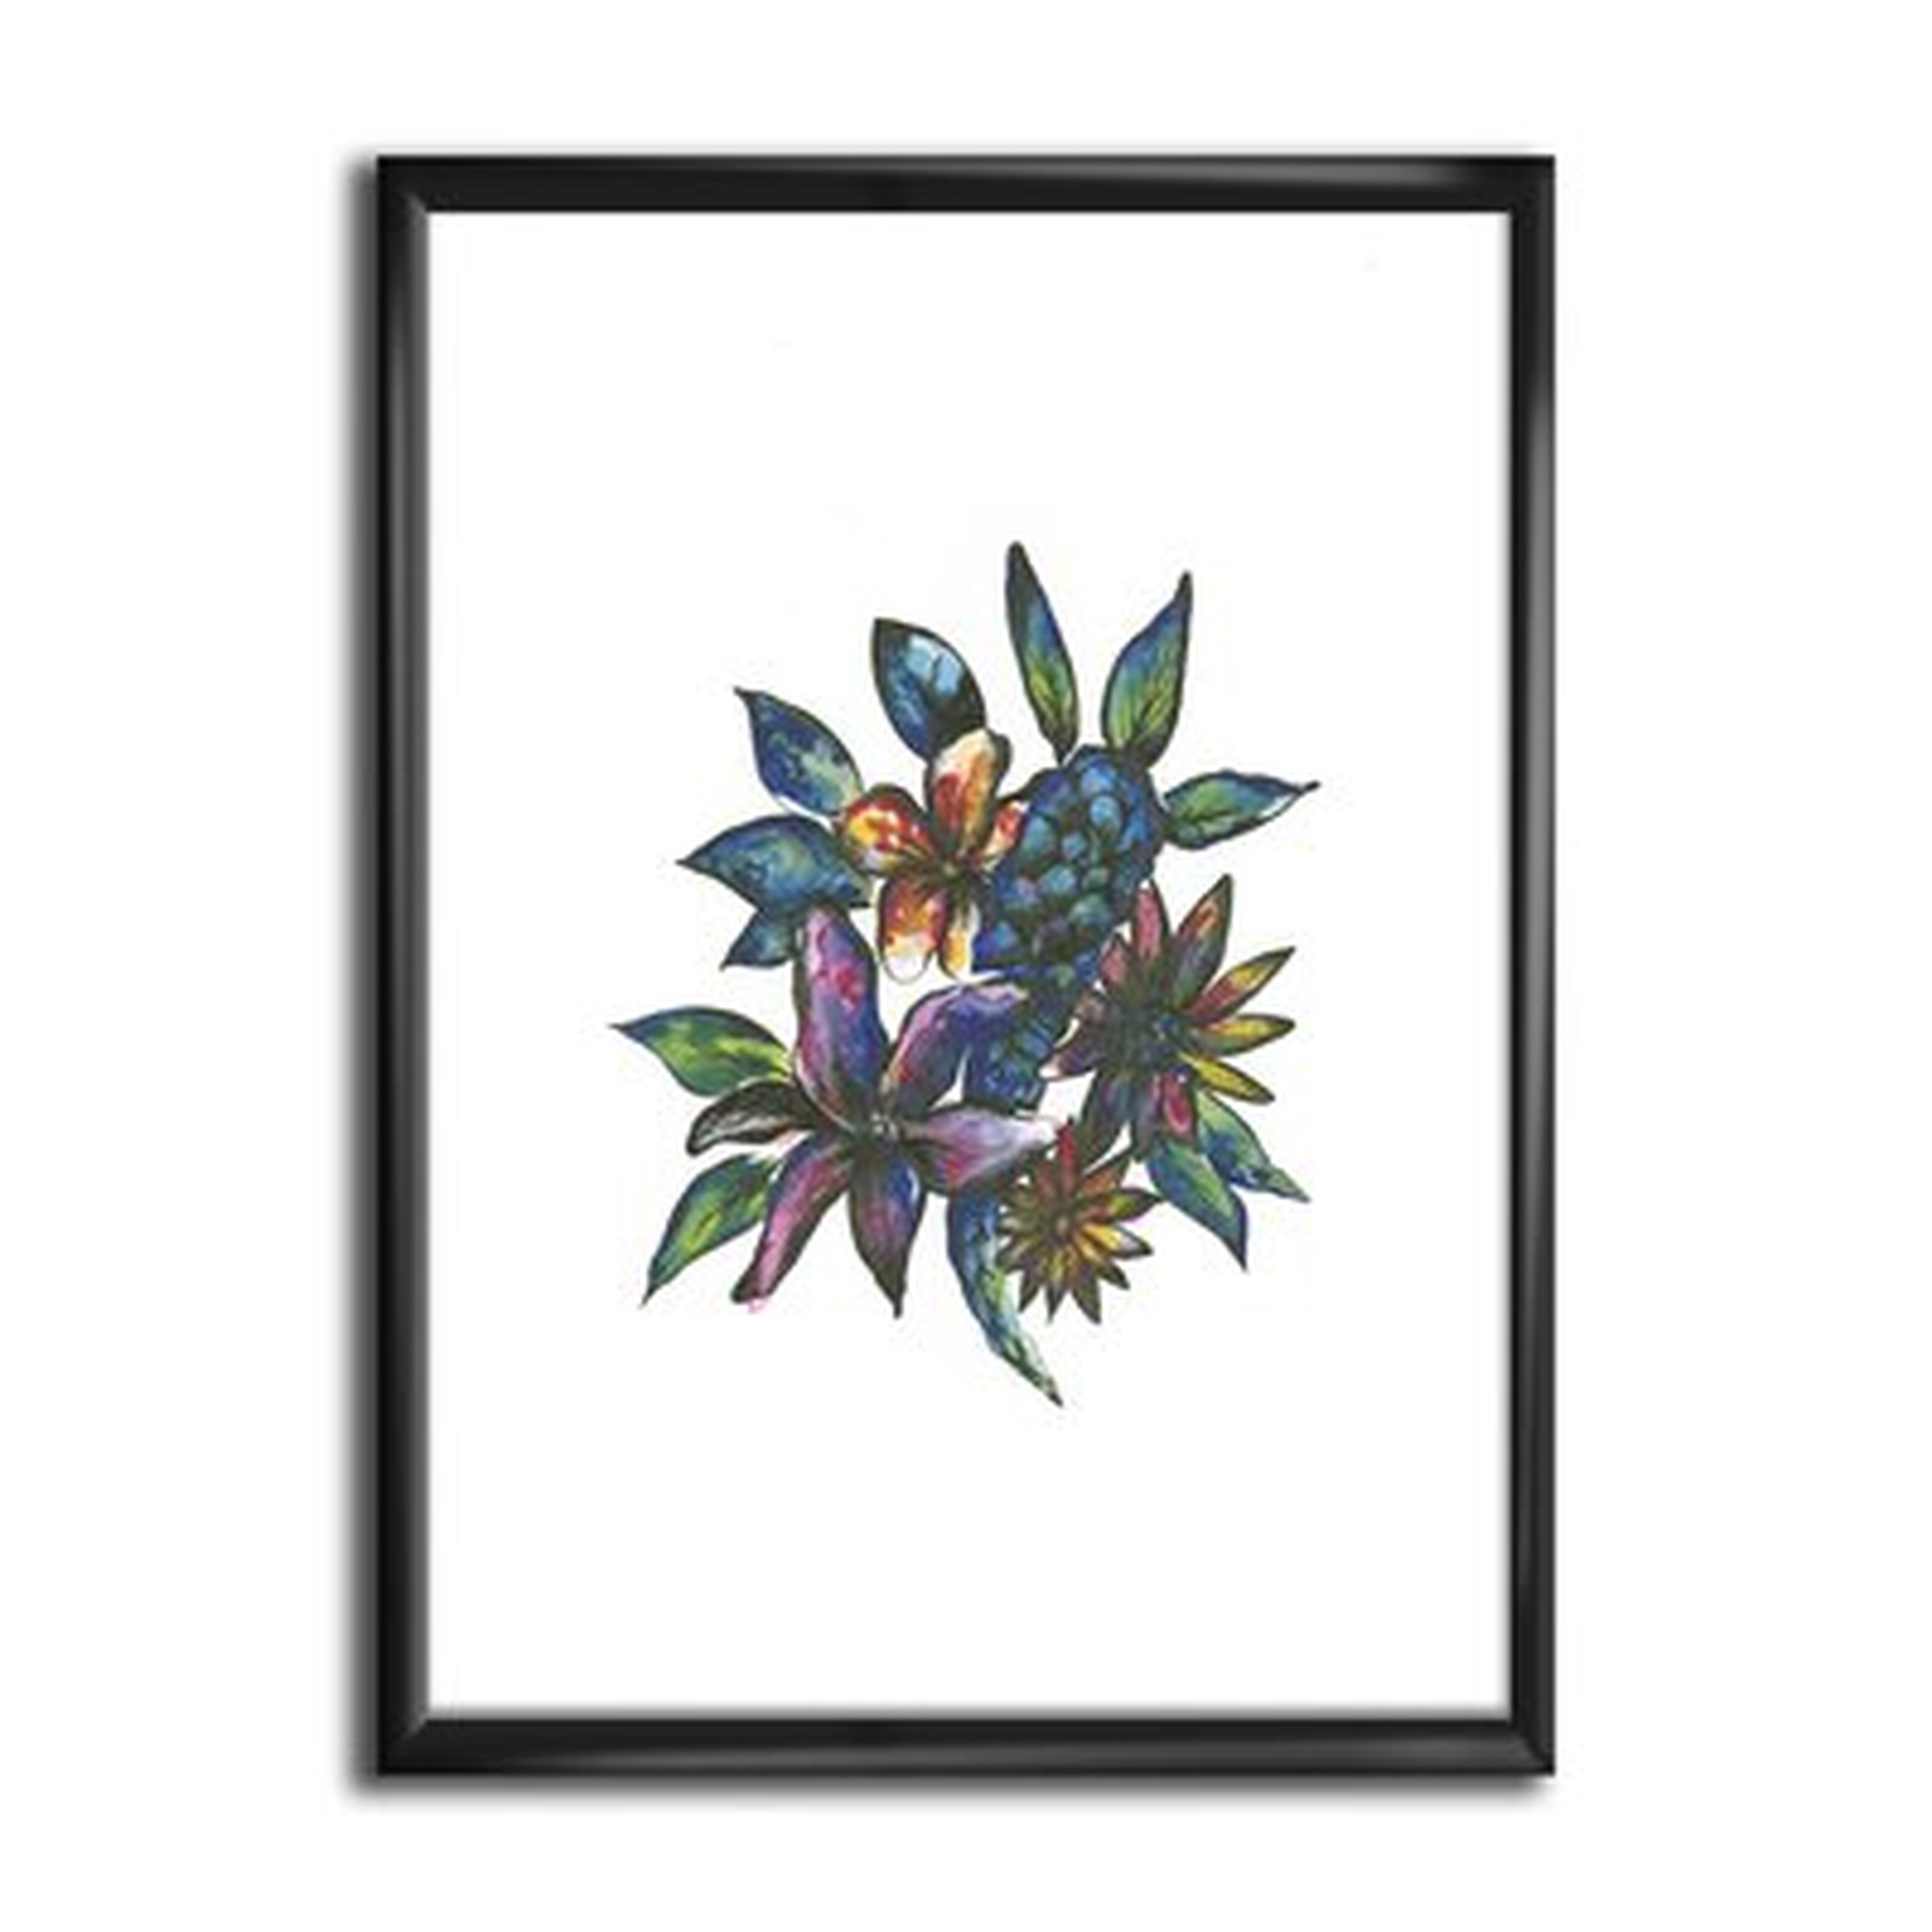 'Tropical Flowers' - Picture Frame Print on Canvas - Wayfair